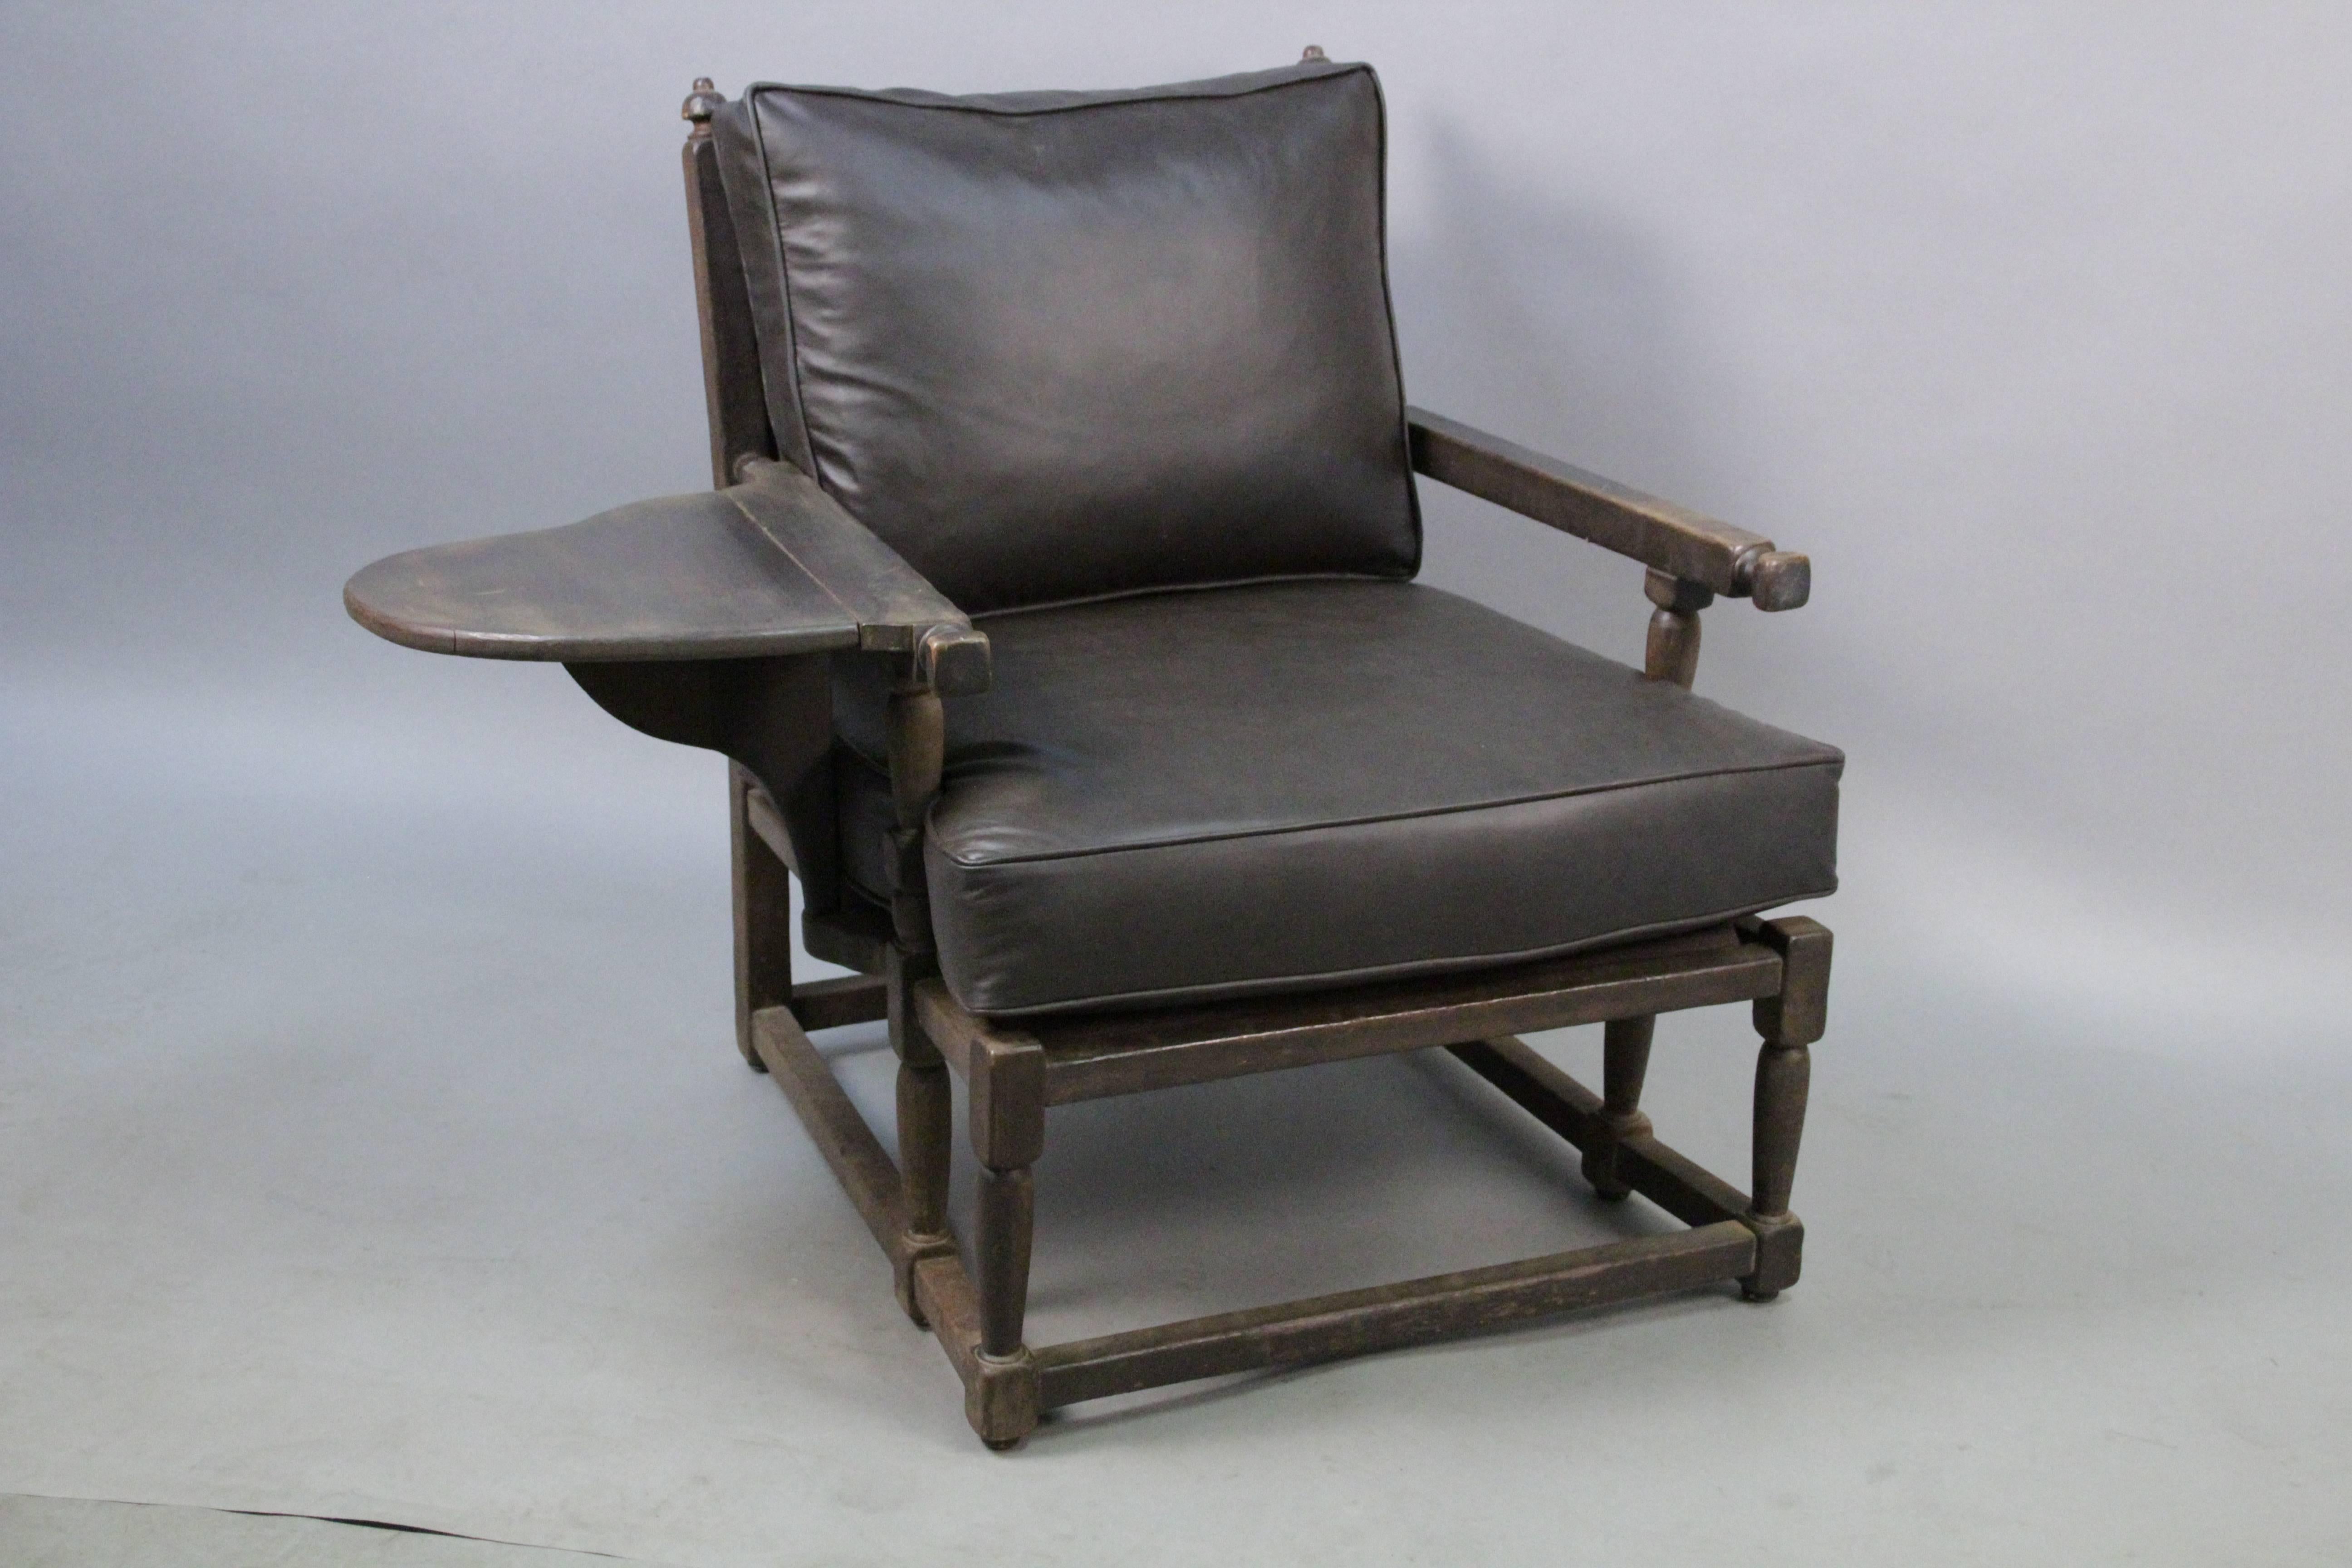 Early Monterey chair in original old wood finish. New leather upholstery. 

With side arm open this chair measures 42 W. 34.5" H x 30.5" W x 34" D x 18.5" seat height.